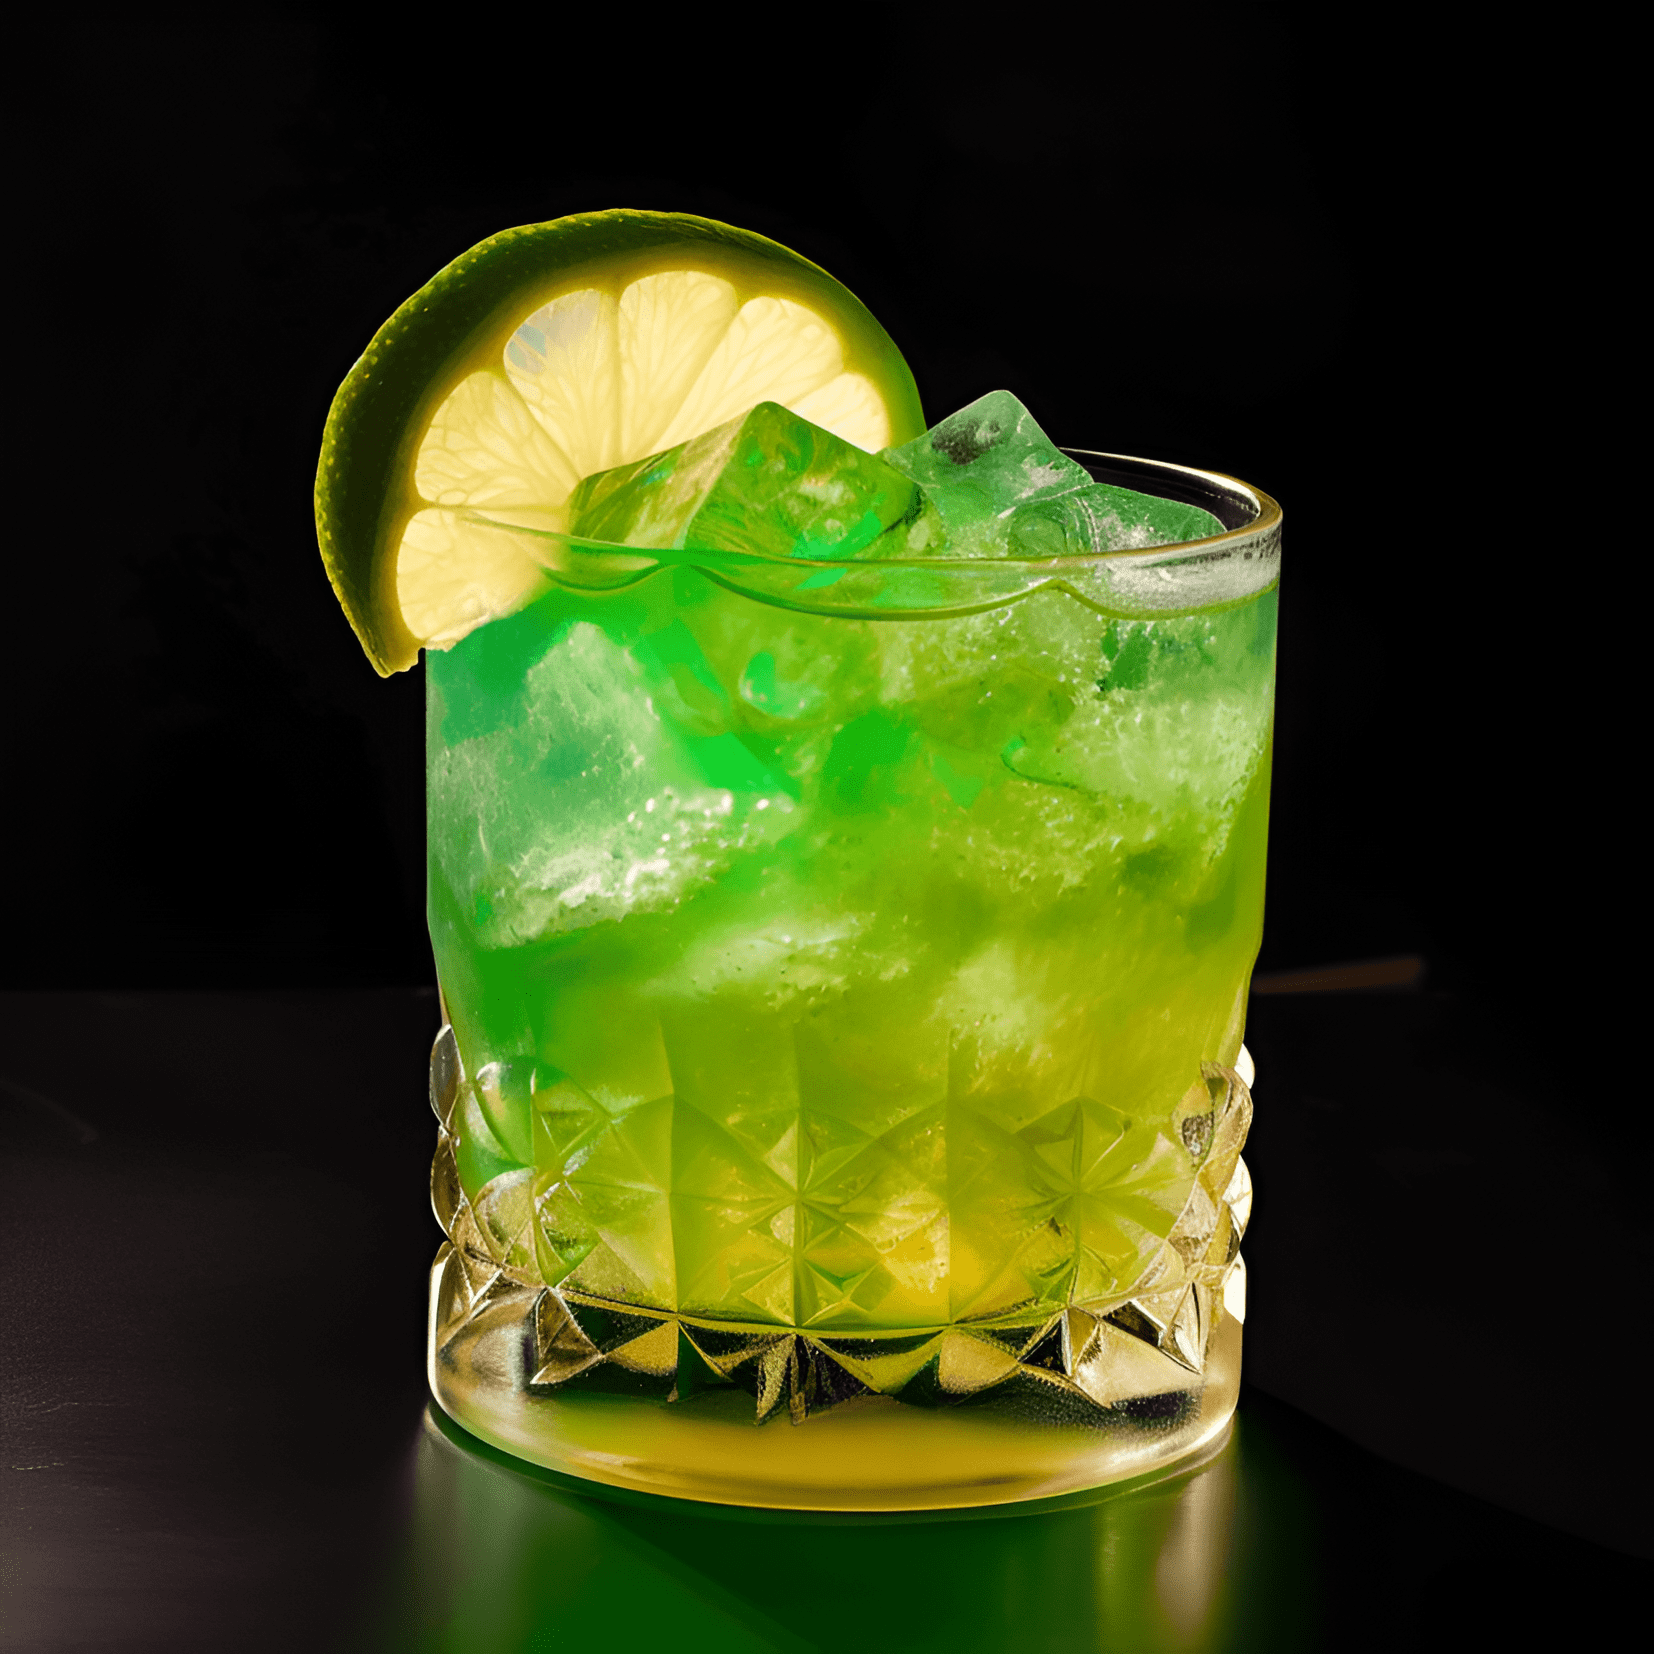 SoCo Lime Cocktail Recipe - The SoCo Lime cocktail has a sweet and sour taste, with a fruity and slightly spicy undertone. It is a refreshing and tangy drink with a smooth and warming finish.